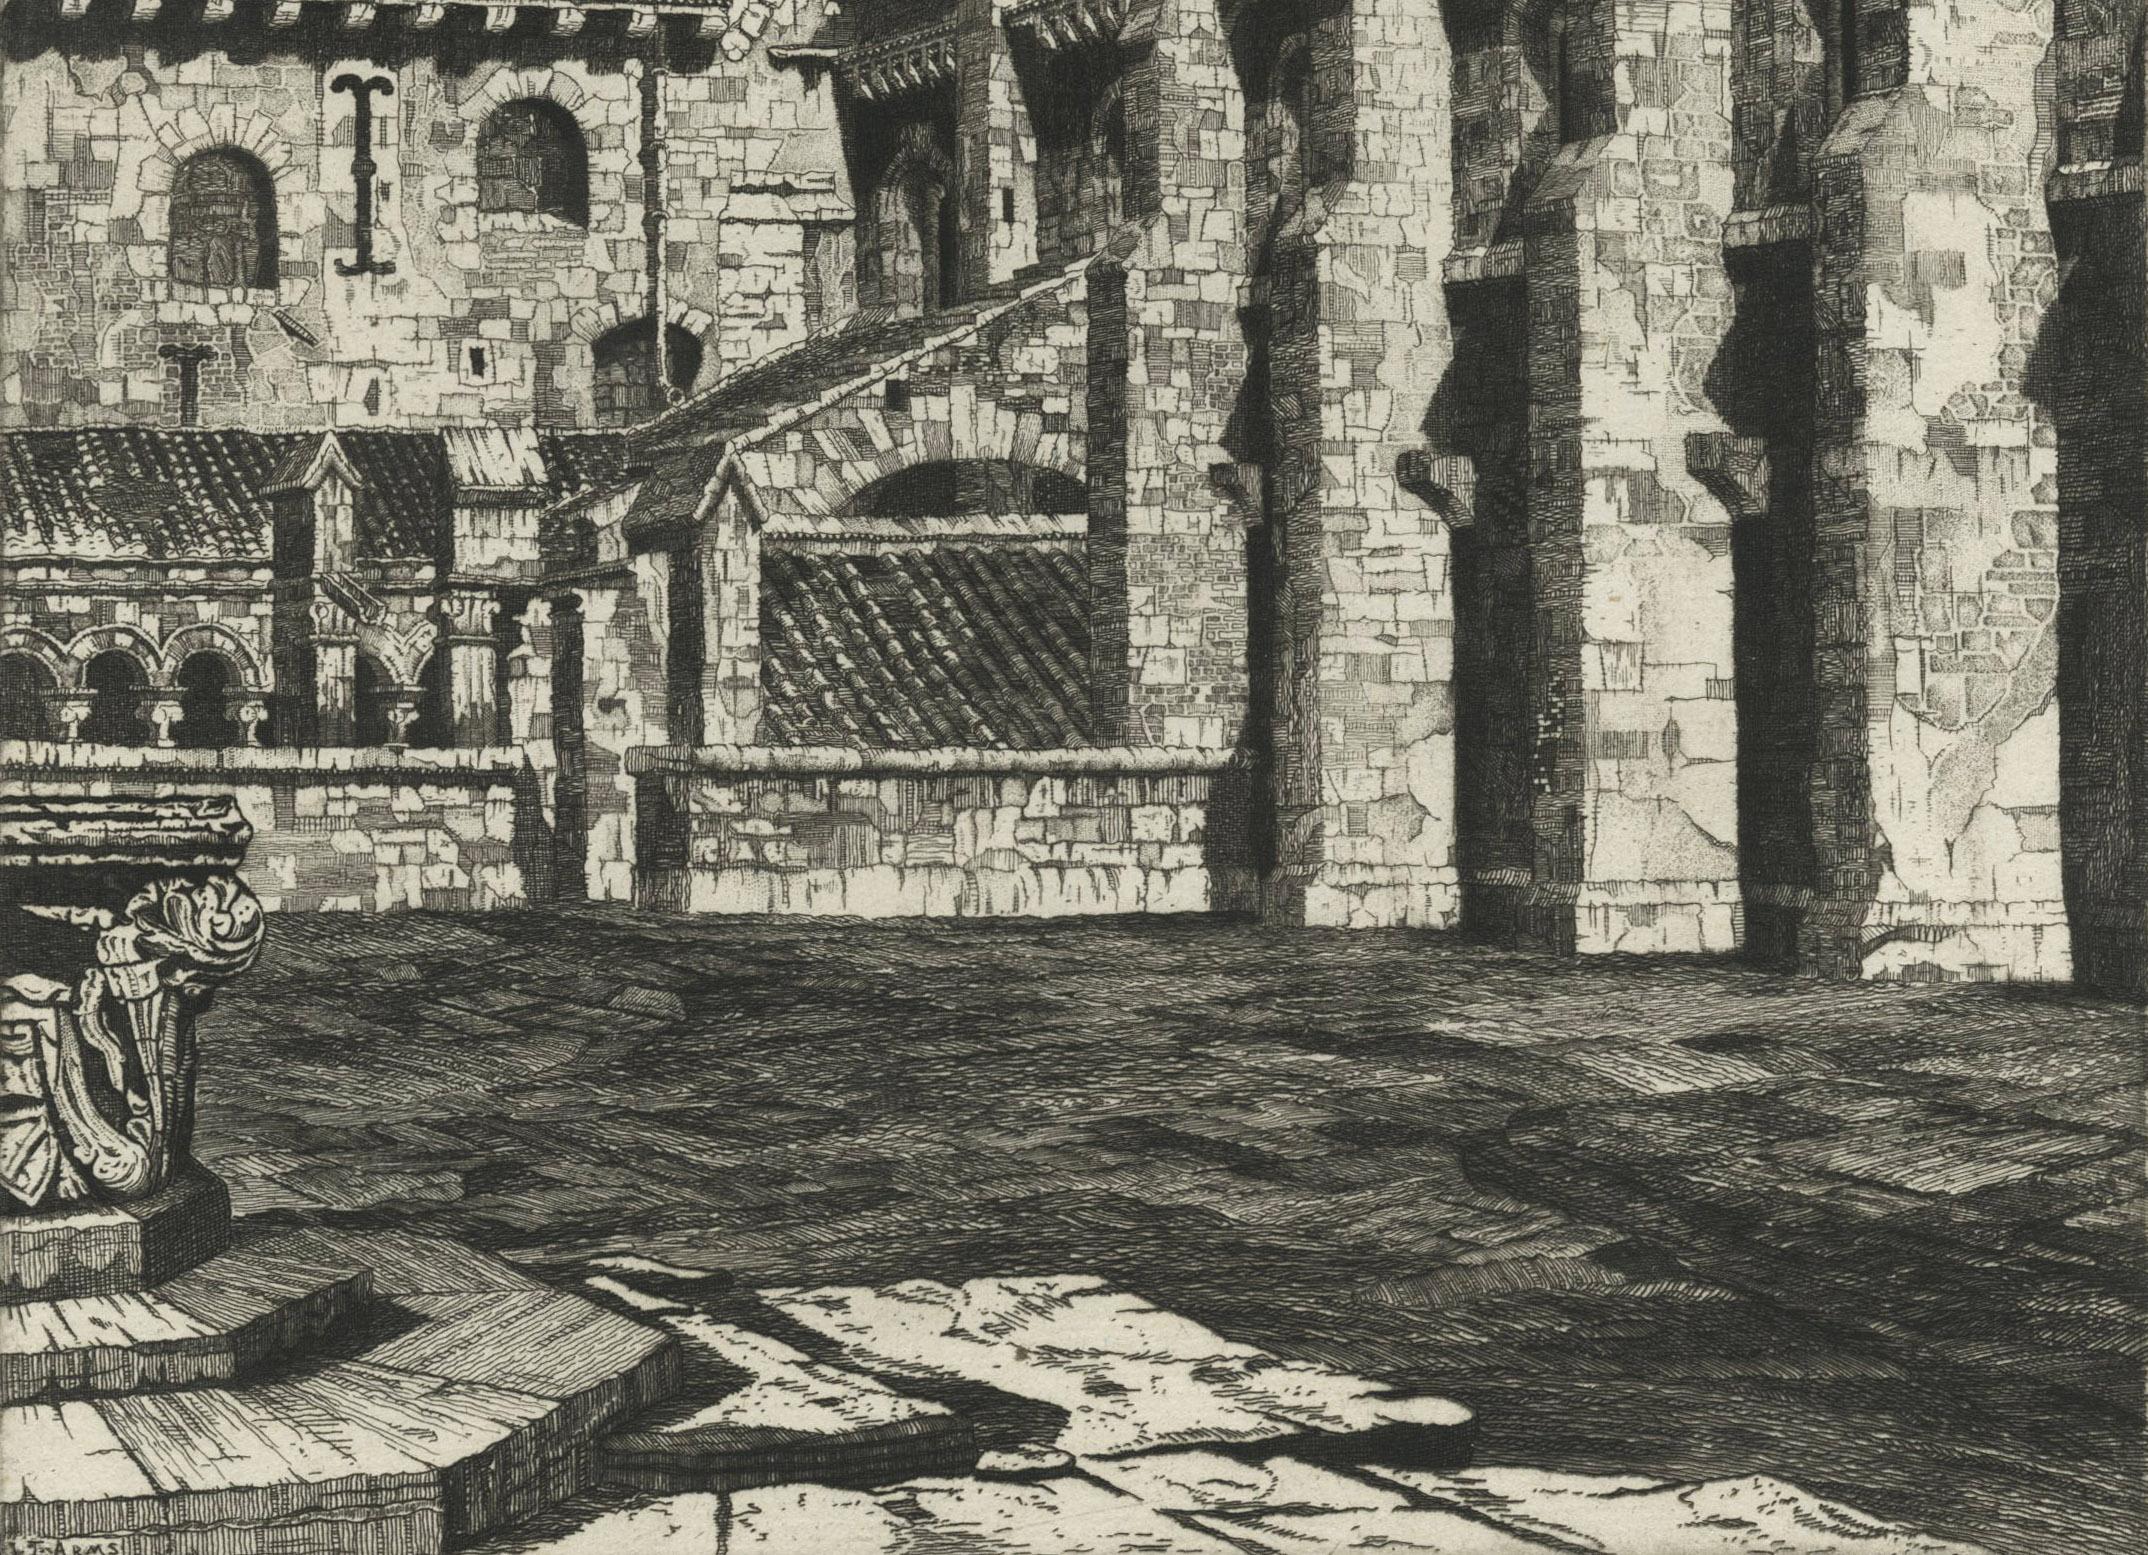 Basilica of Madeleine, Vezelay
Etching, 1929
Signed and dated lower right (see photo)
Annotated: 